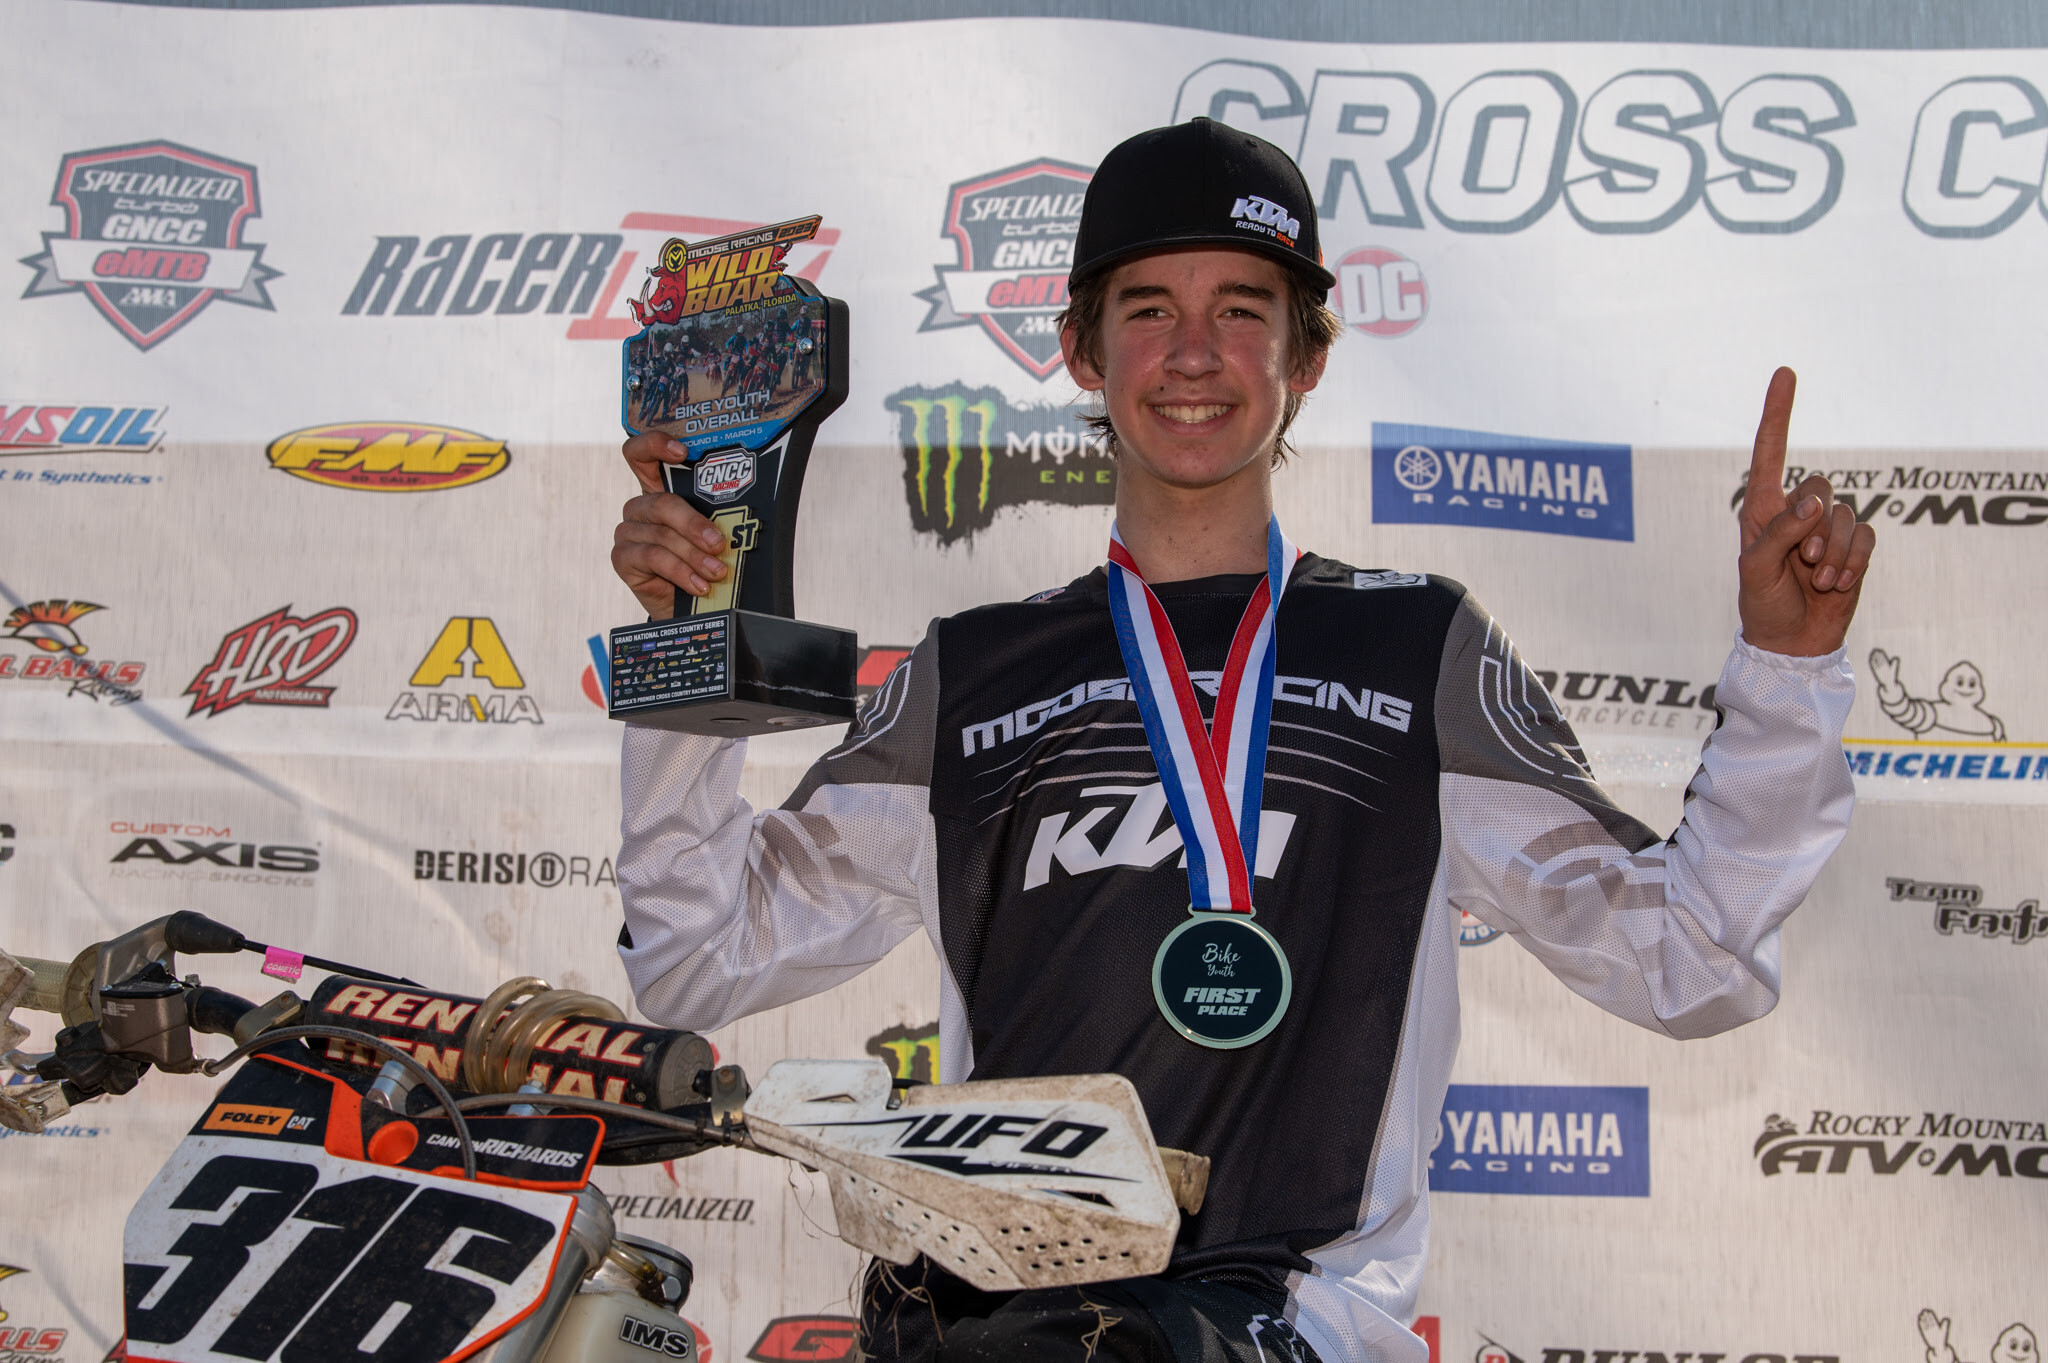 Canyon Richards battled back to earn the Youth Overall win in Florida.